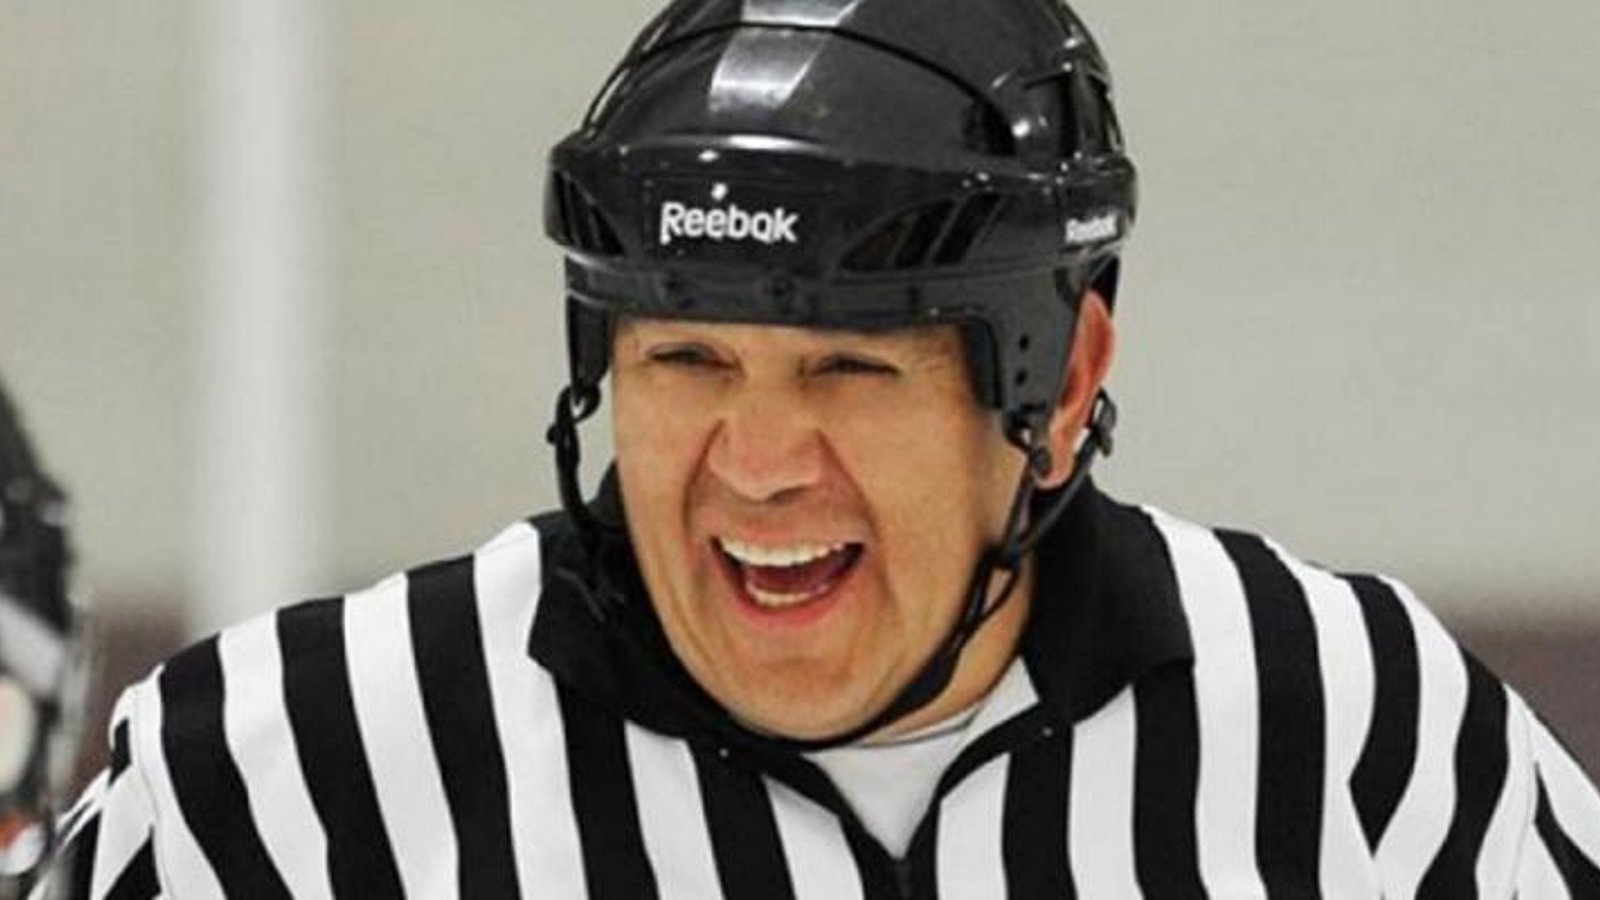 Referee dies after suffering on ice injury. 